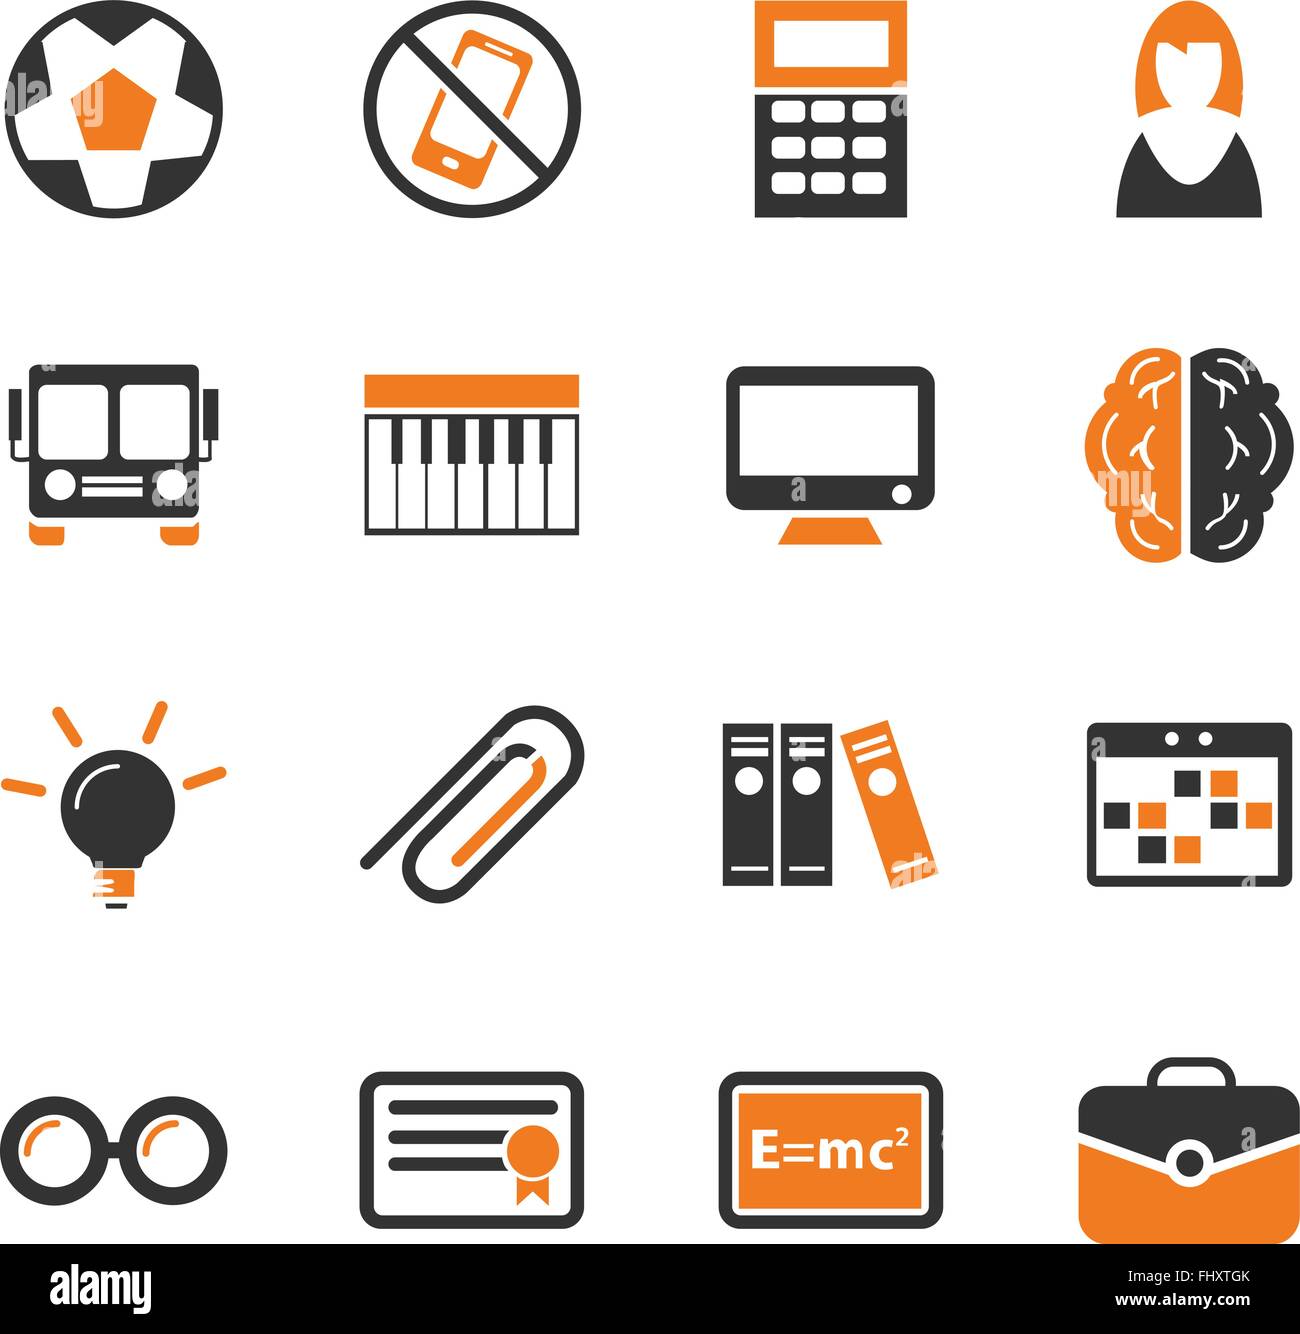 education web icons for user interface design Stock Vector